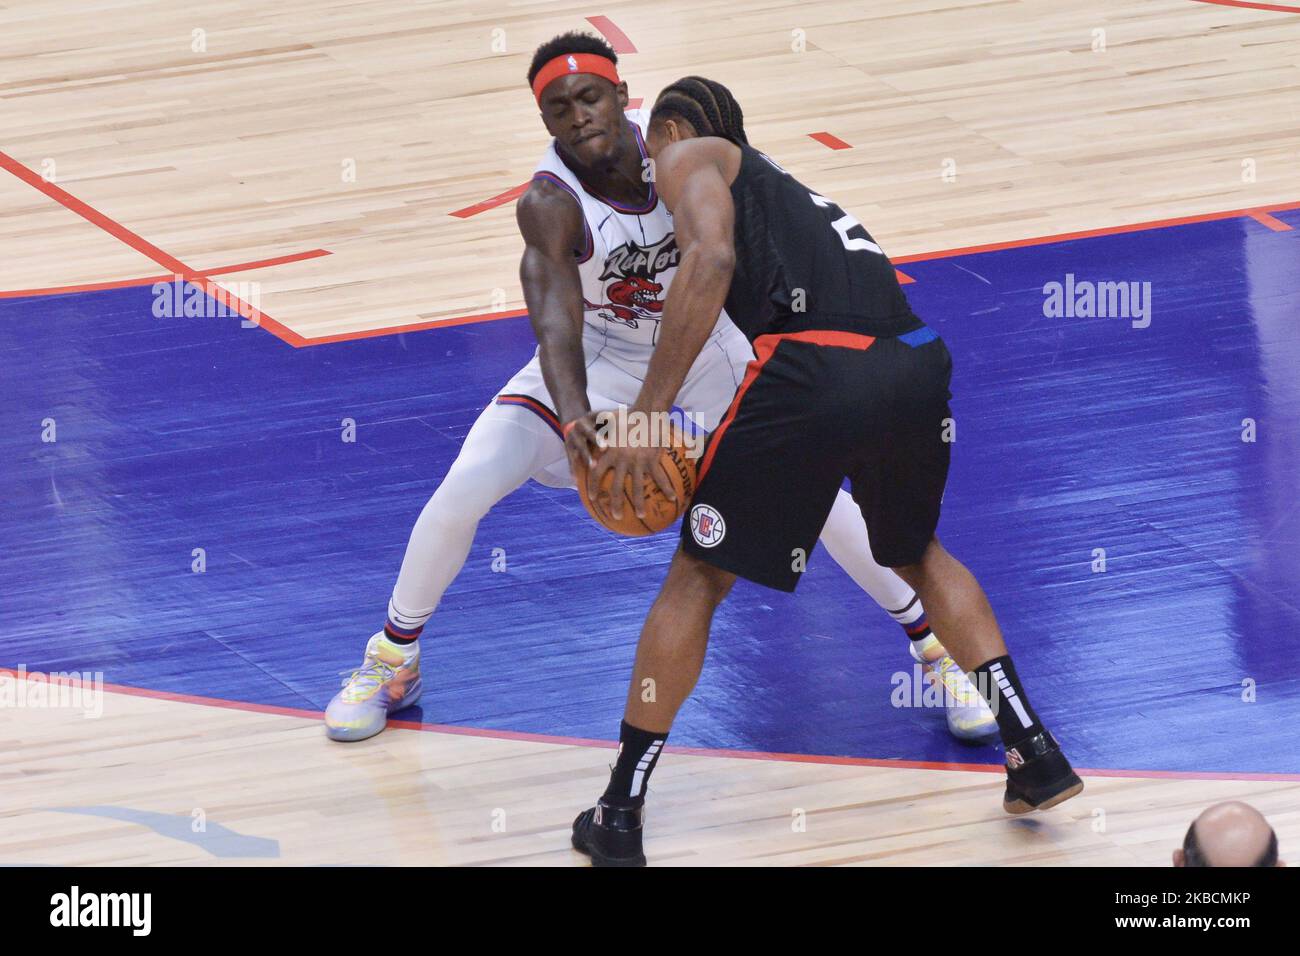 Pascal Siakam #43 of the Toronto Raptorstrying to pick up the ball from Kawhi Leonard #2 of the Los Angeles Clippers during the Toronto Raptors vs Los Angeles Clippers NBA regular season game at Scotiabank Arena on December 11, 2019, in Toronto, Canada (Score after first half 46:64) (Photo by Anatoliy Cherkasov/NurPhoto) Stock Photo